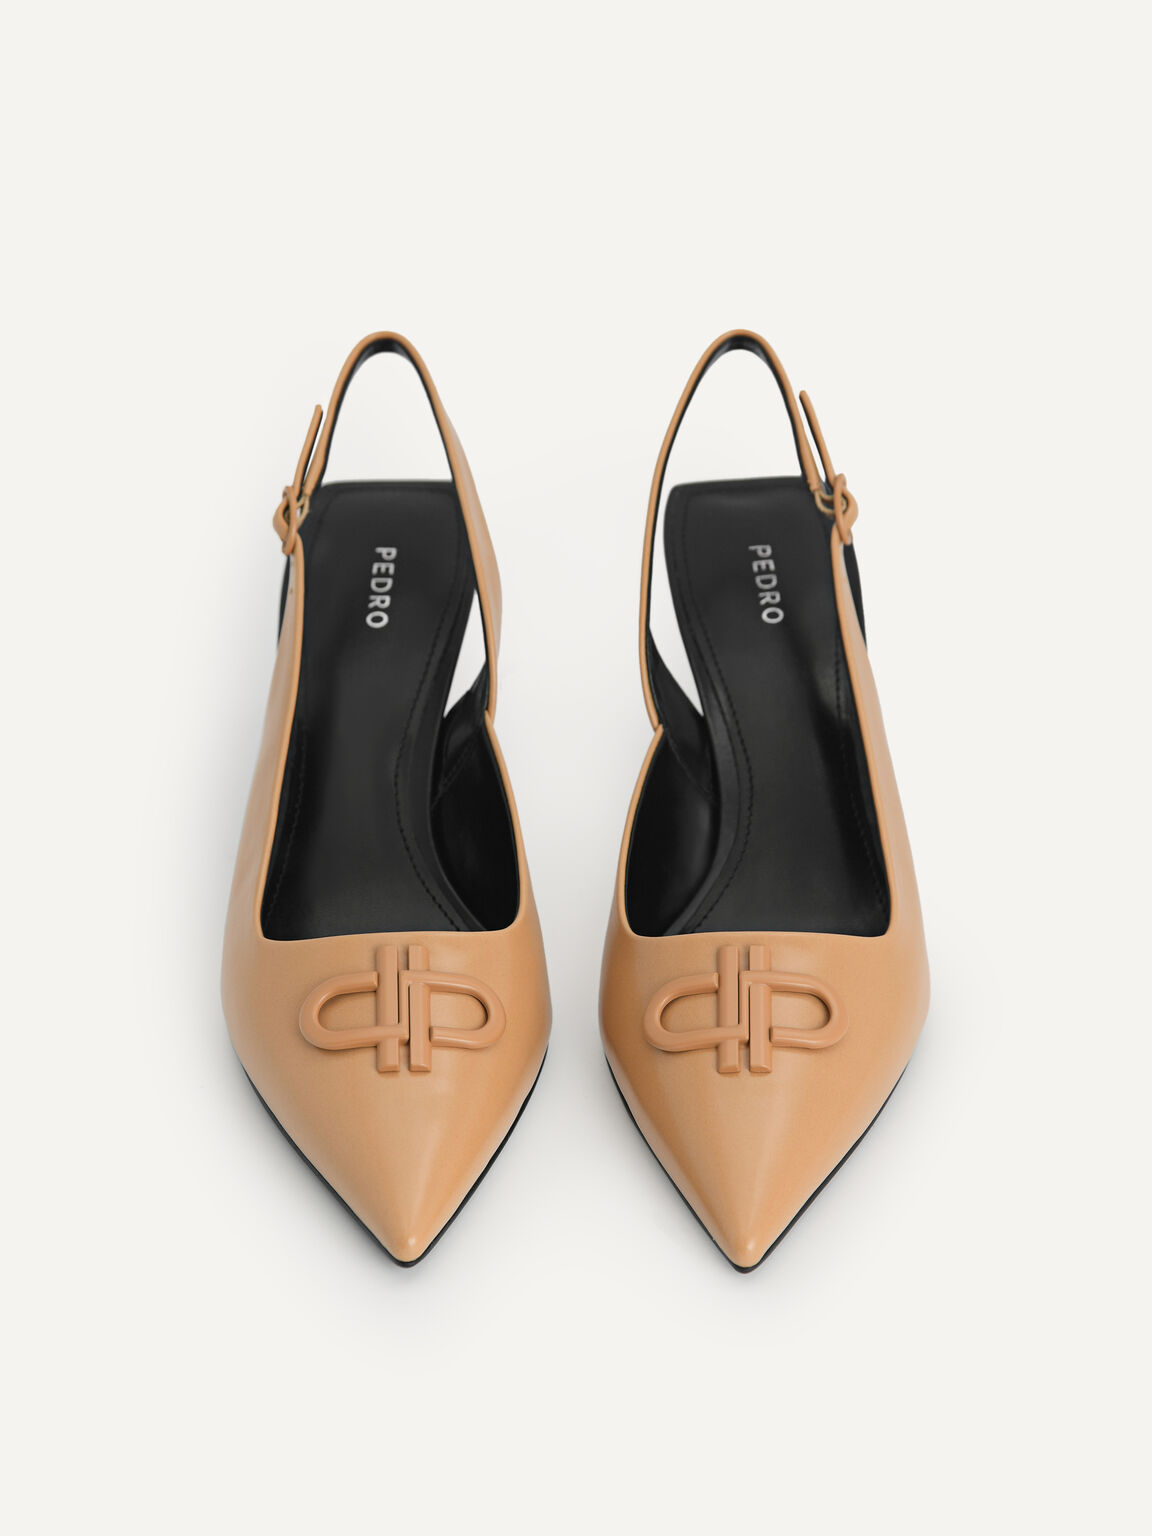 Icon Leather Pointed Toe Slingback Heels, Camel